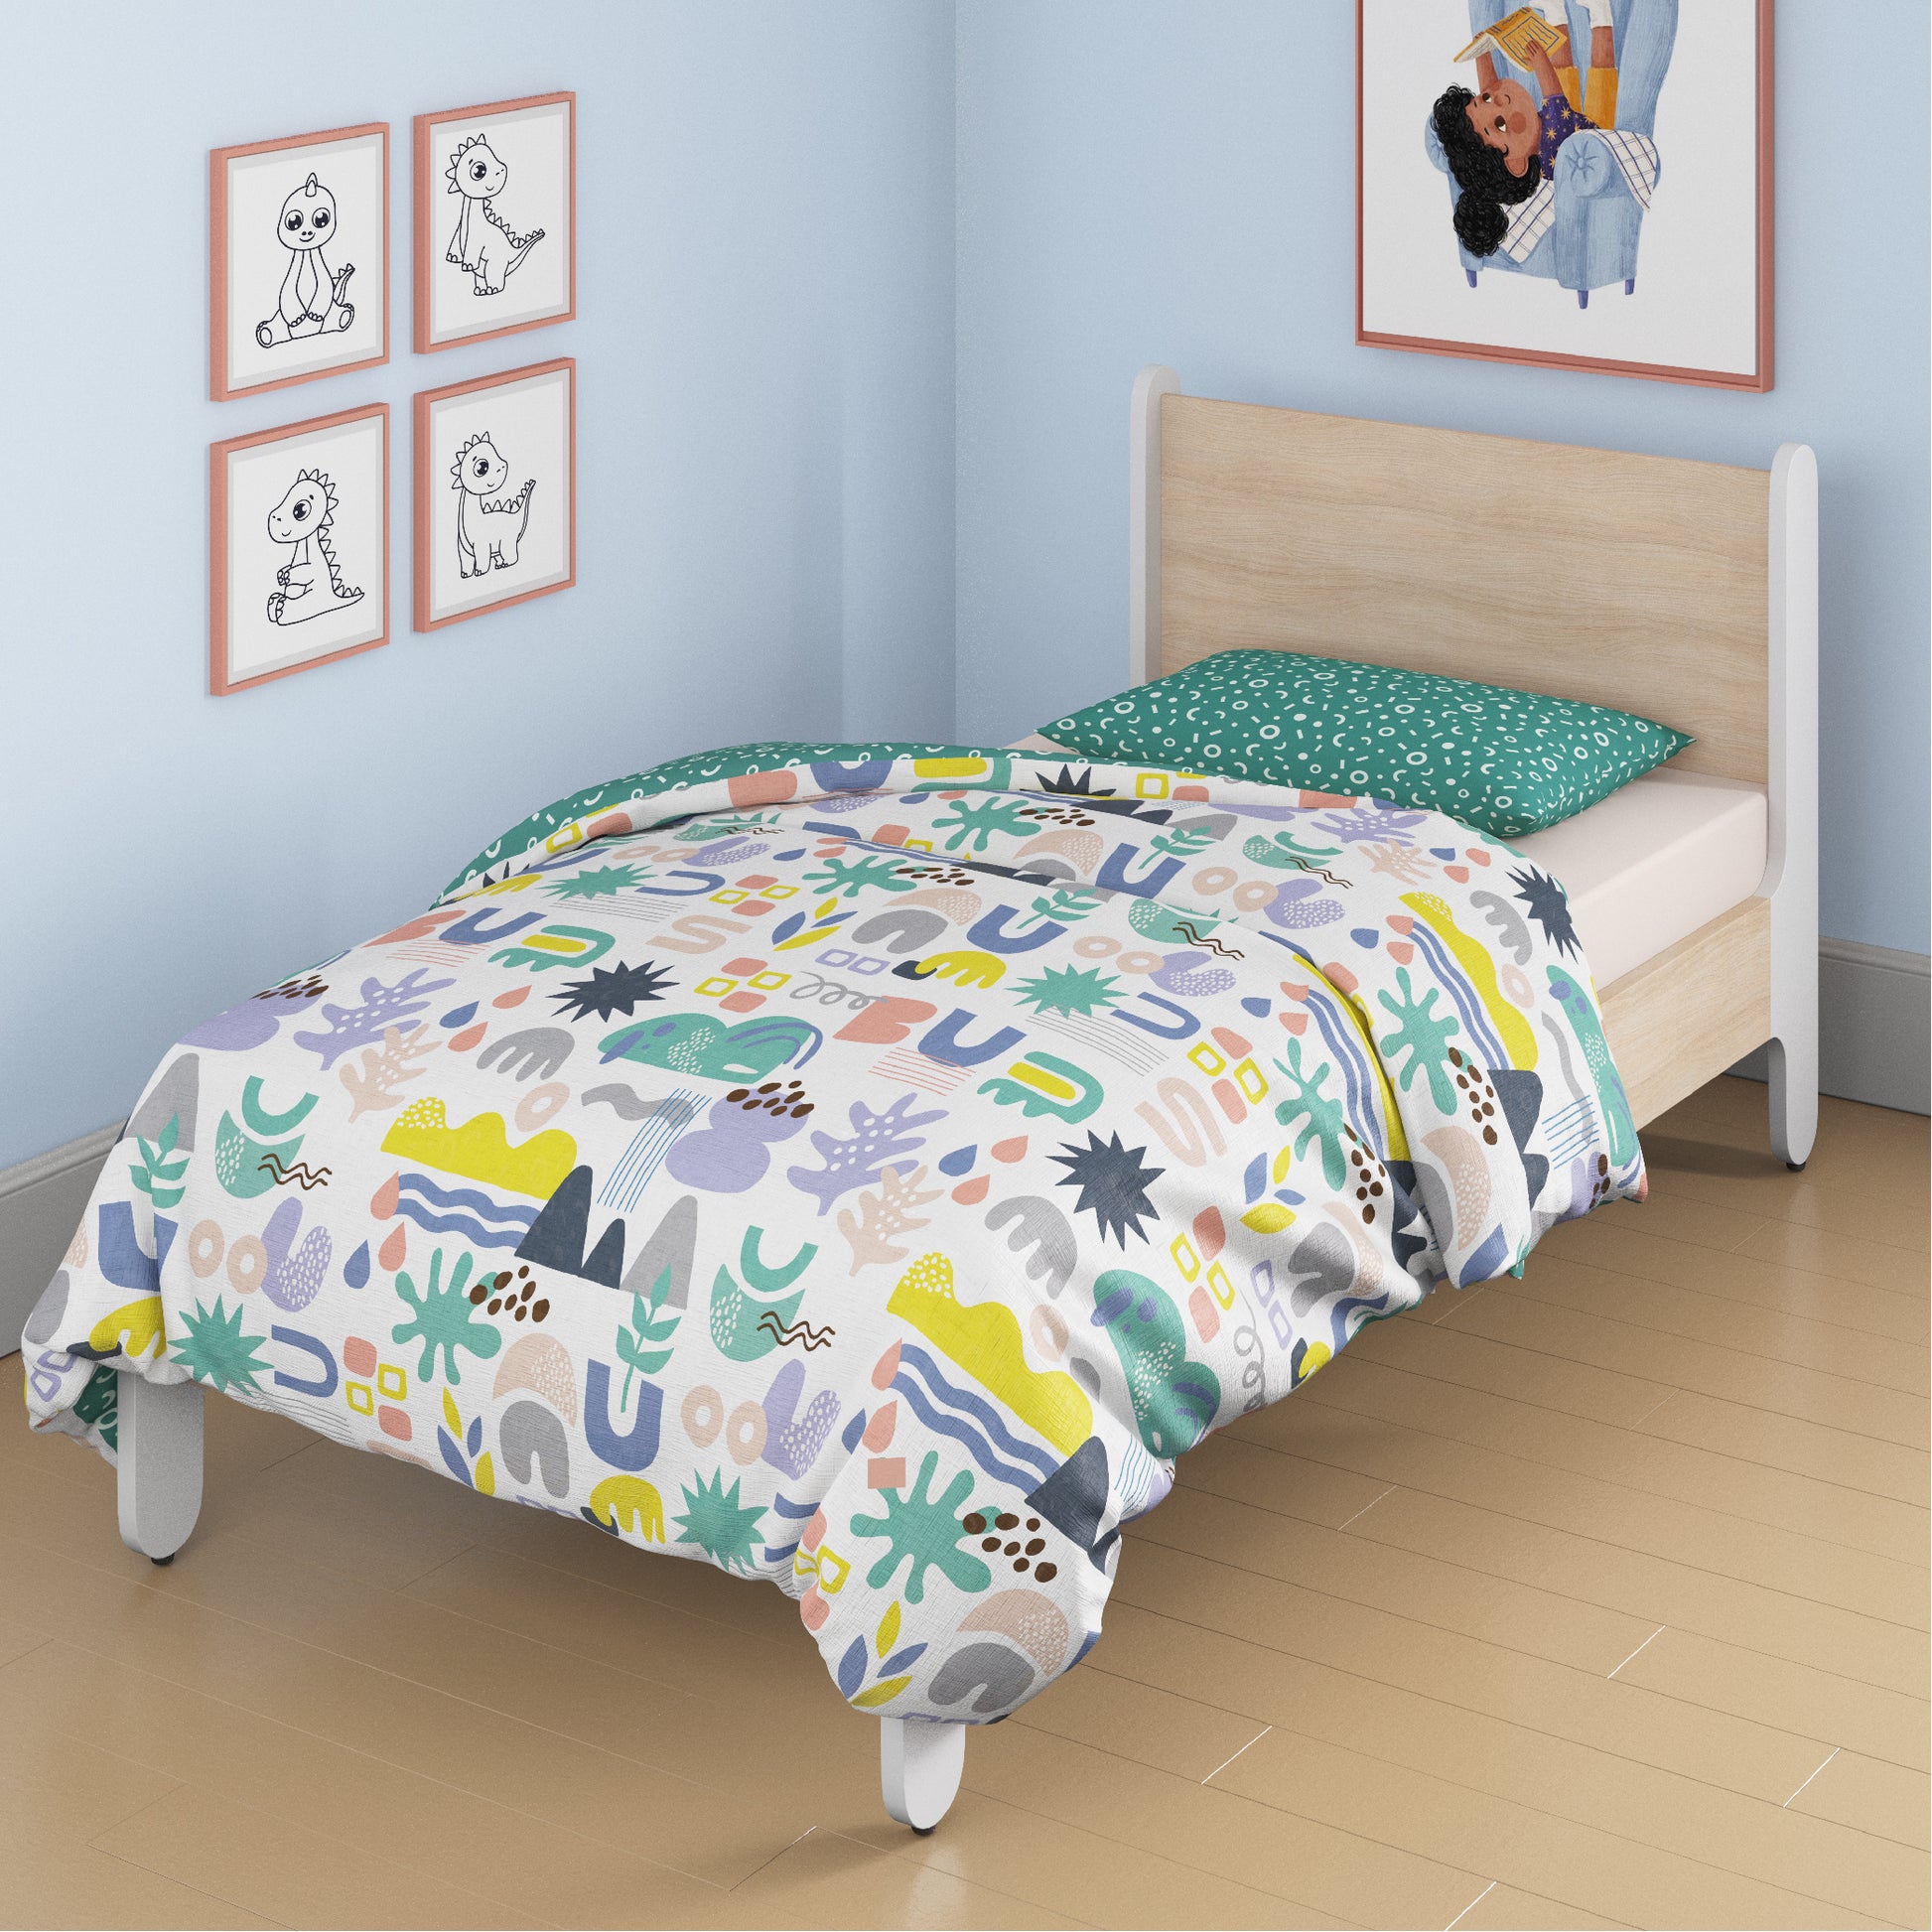 media_gallary Oodles of Doodles Reversible AC Comforter Single Bed Size 1